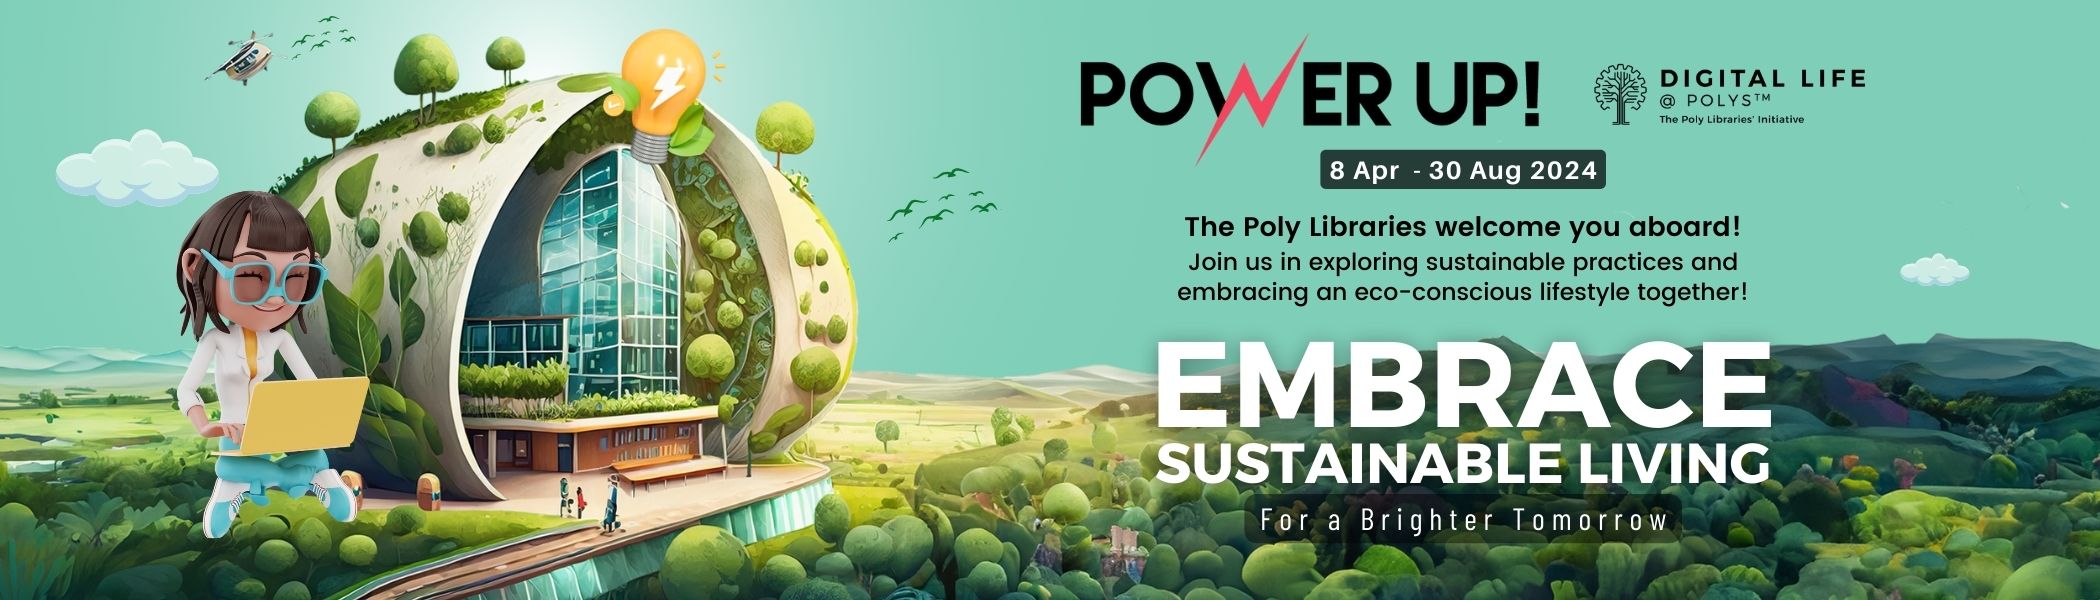 Power Up! Embrace Sustainable Living